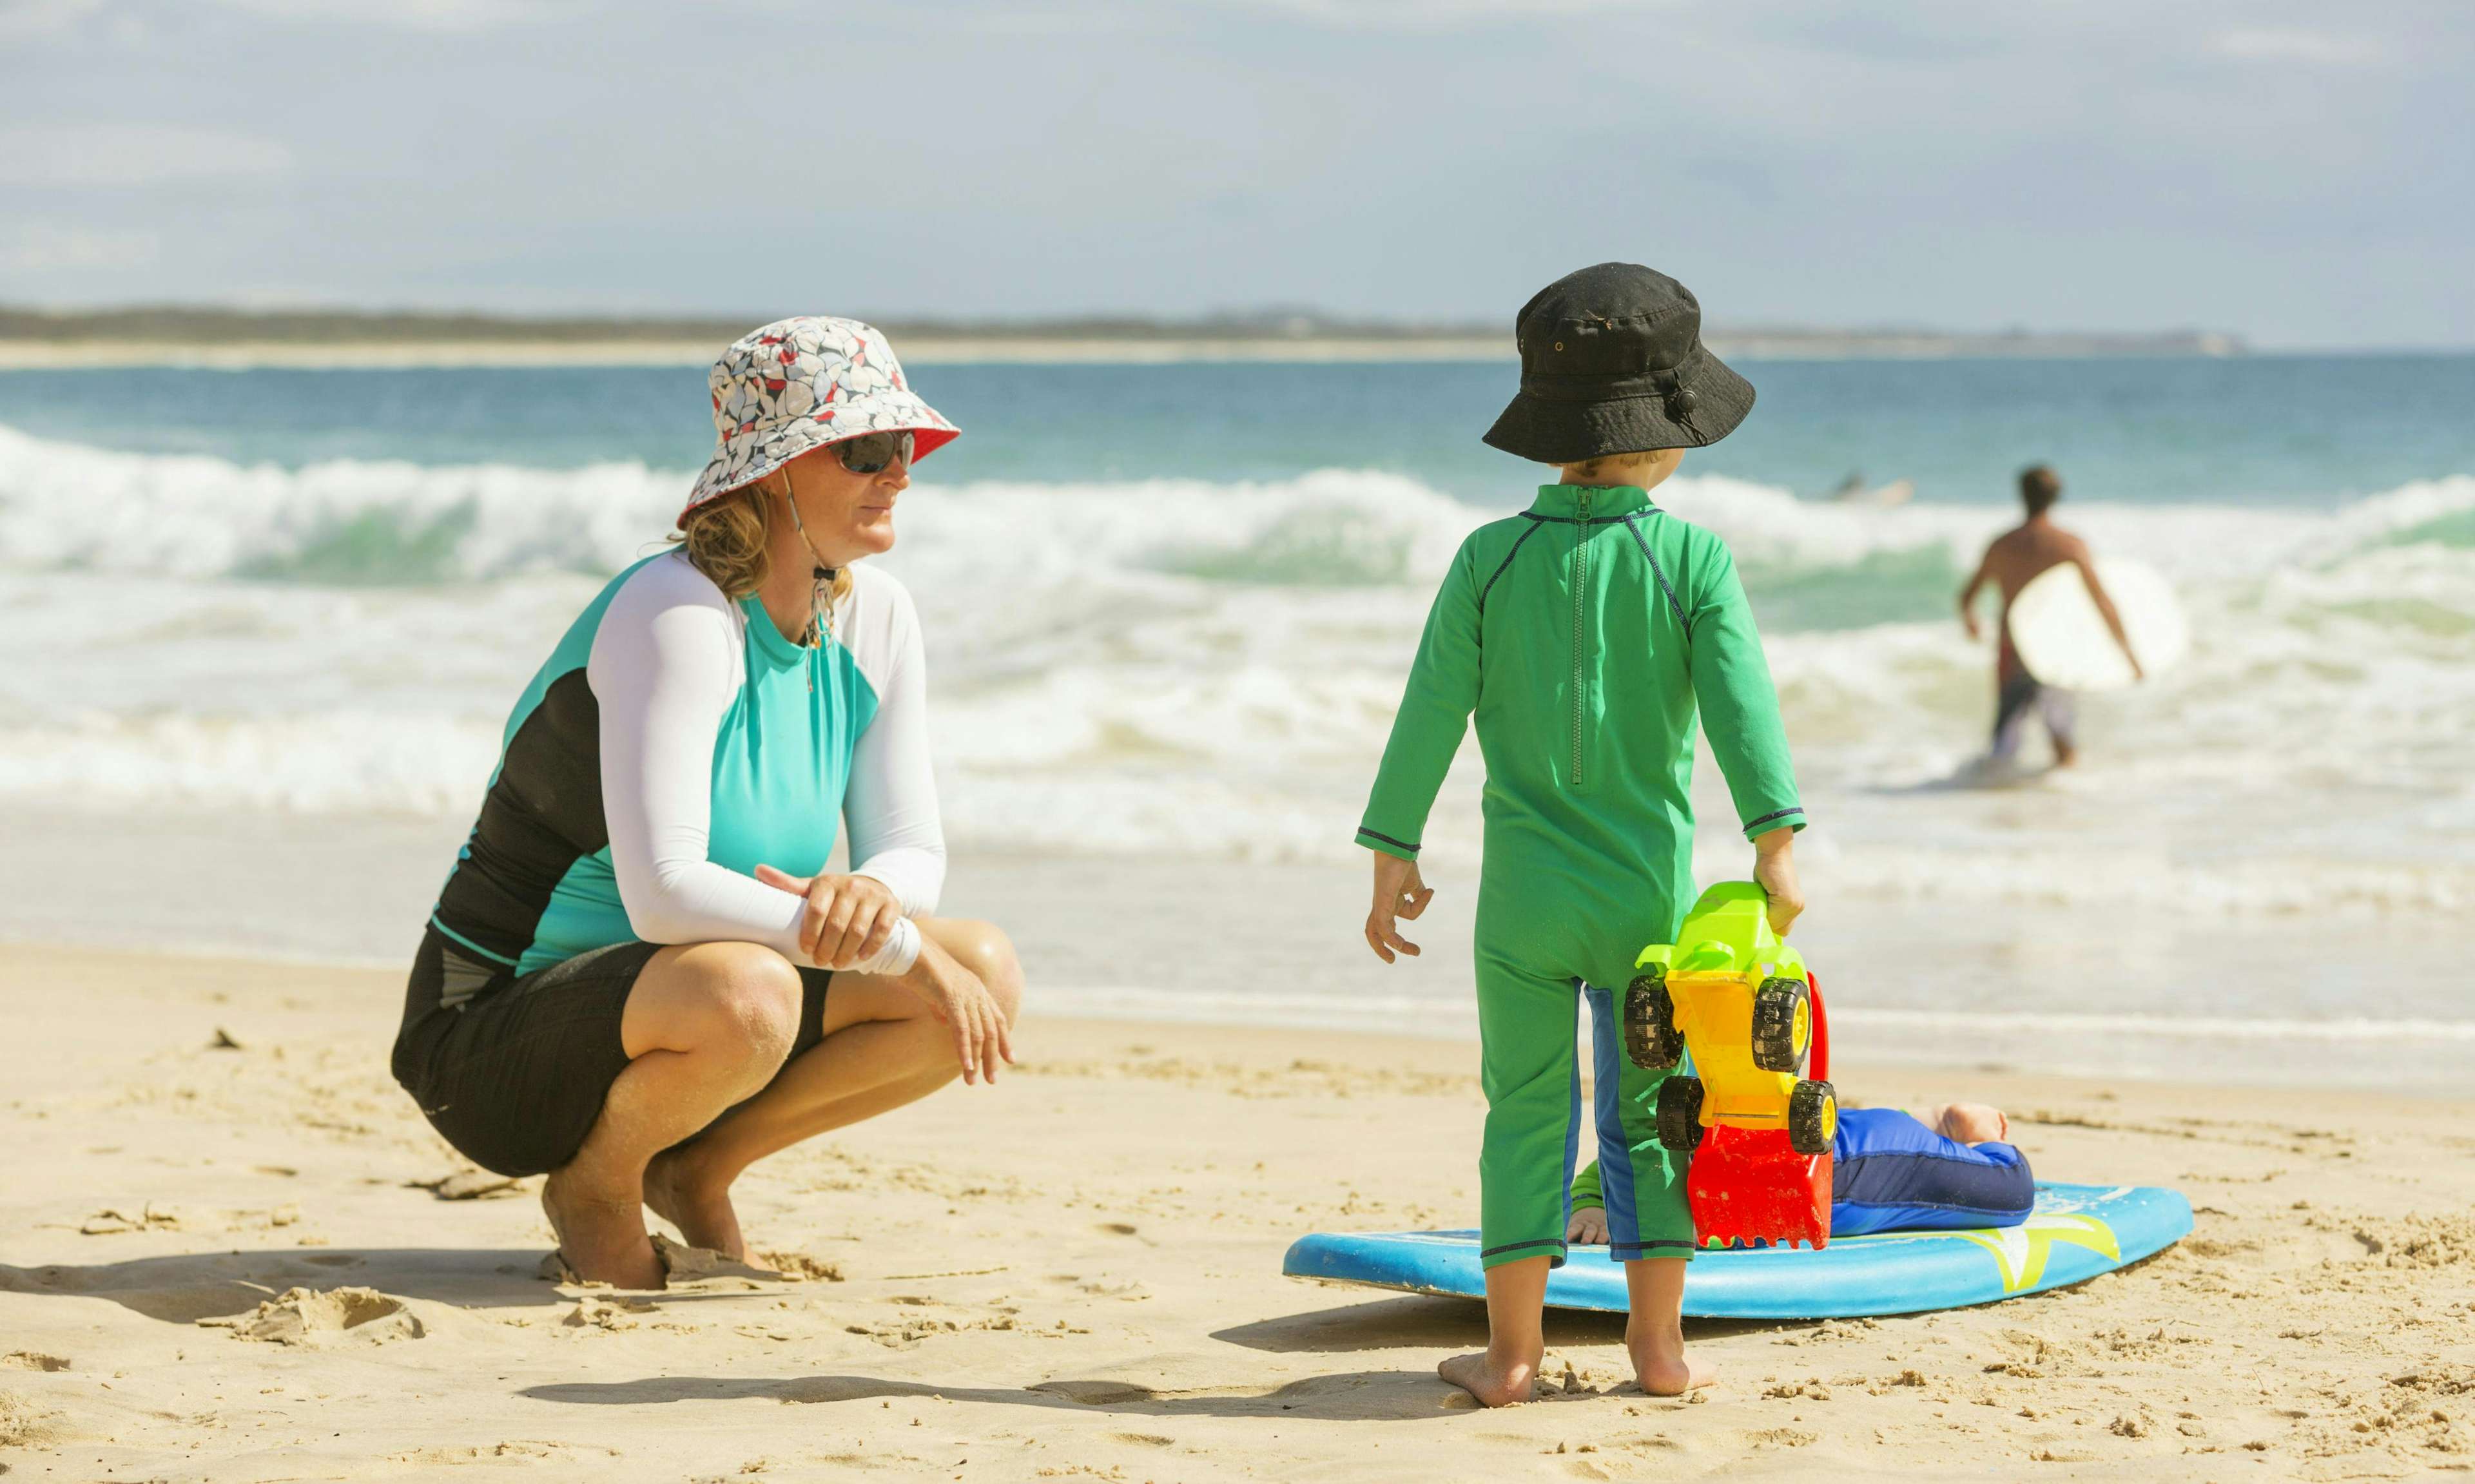 Mom and child on the beach wearing sun protective clothing